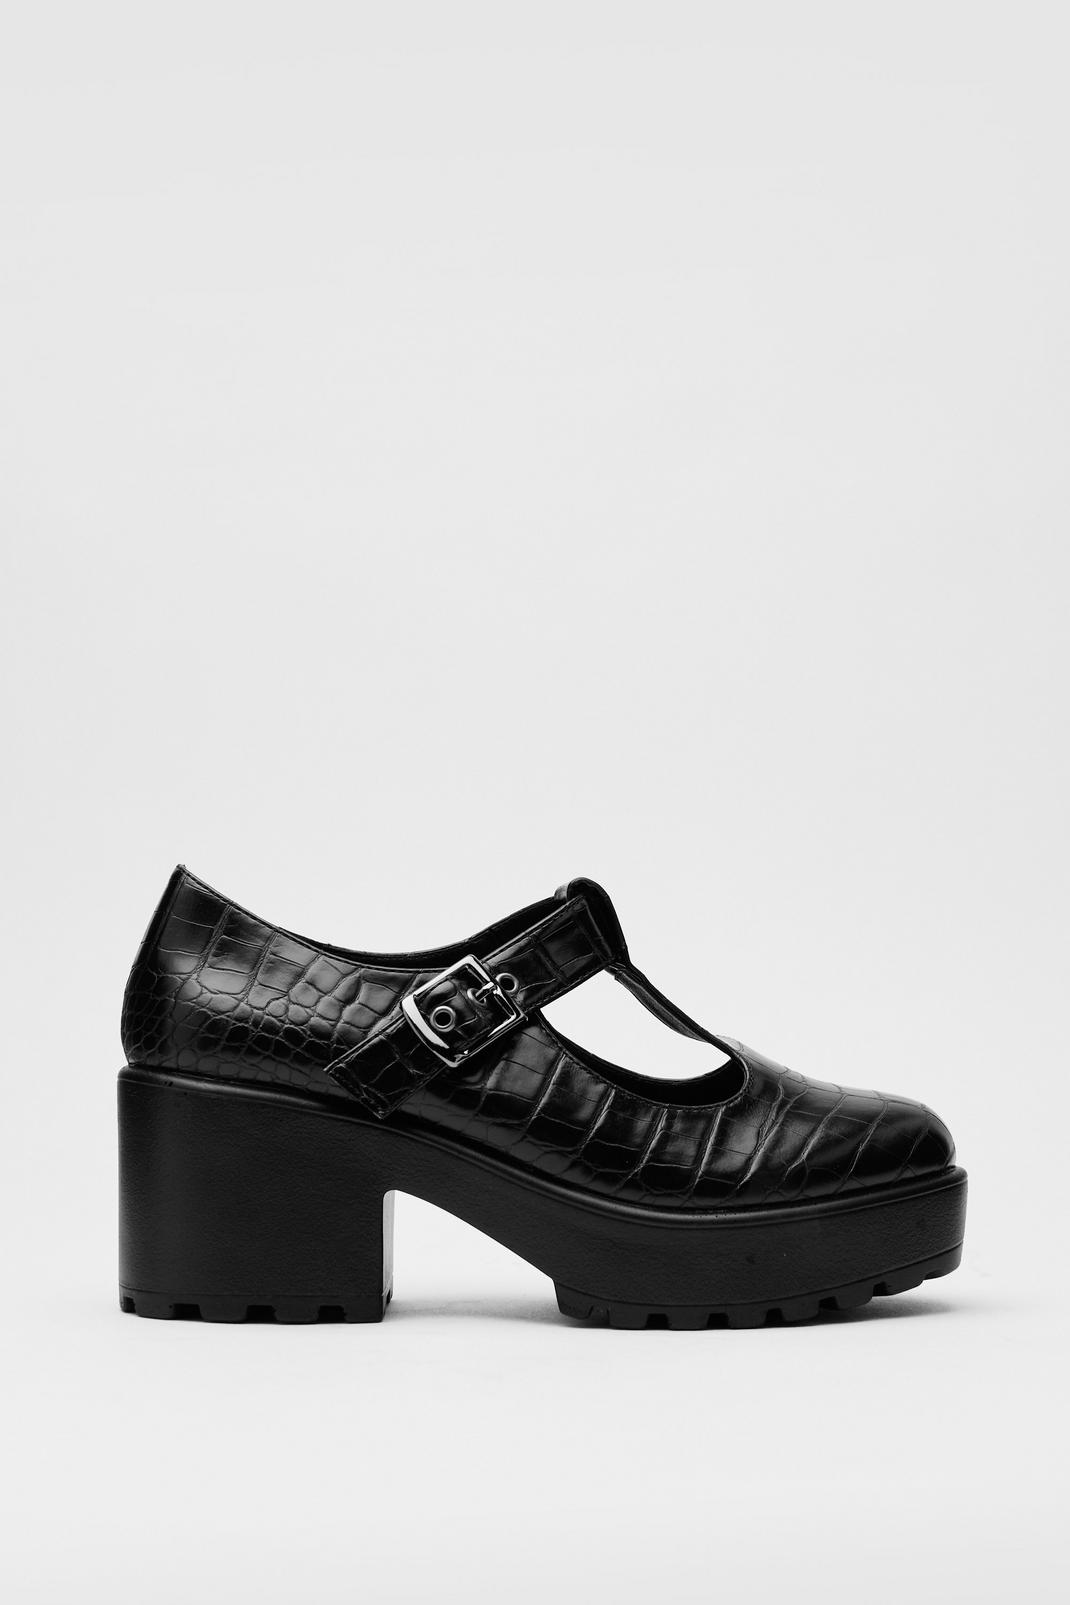 Black Patent Leather Chunky Croc Mary Jane Shoes image number 1